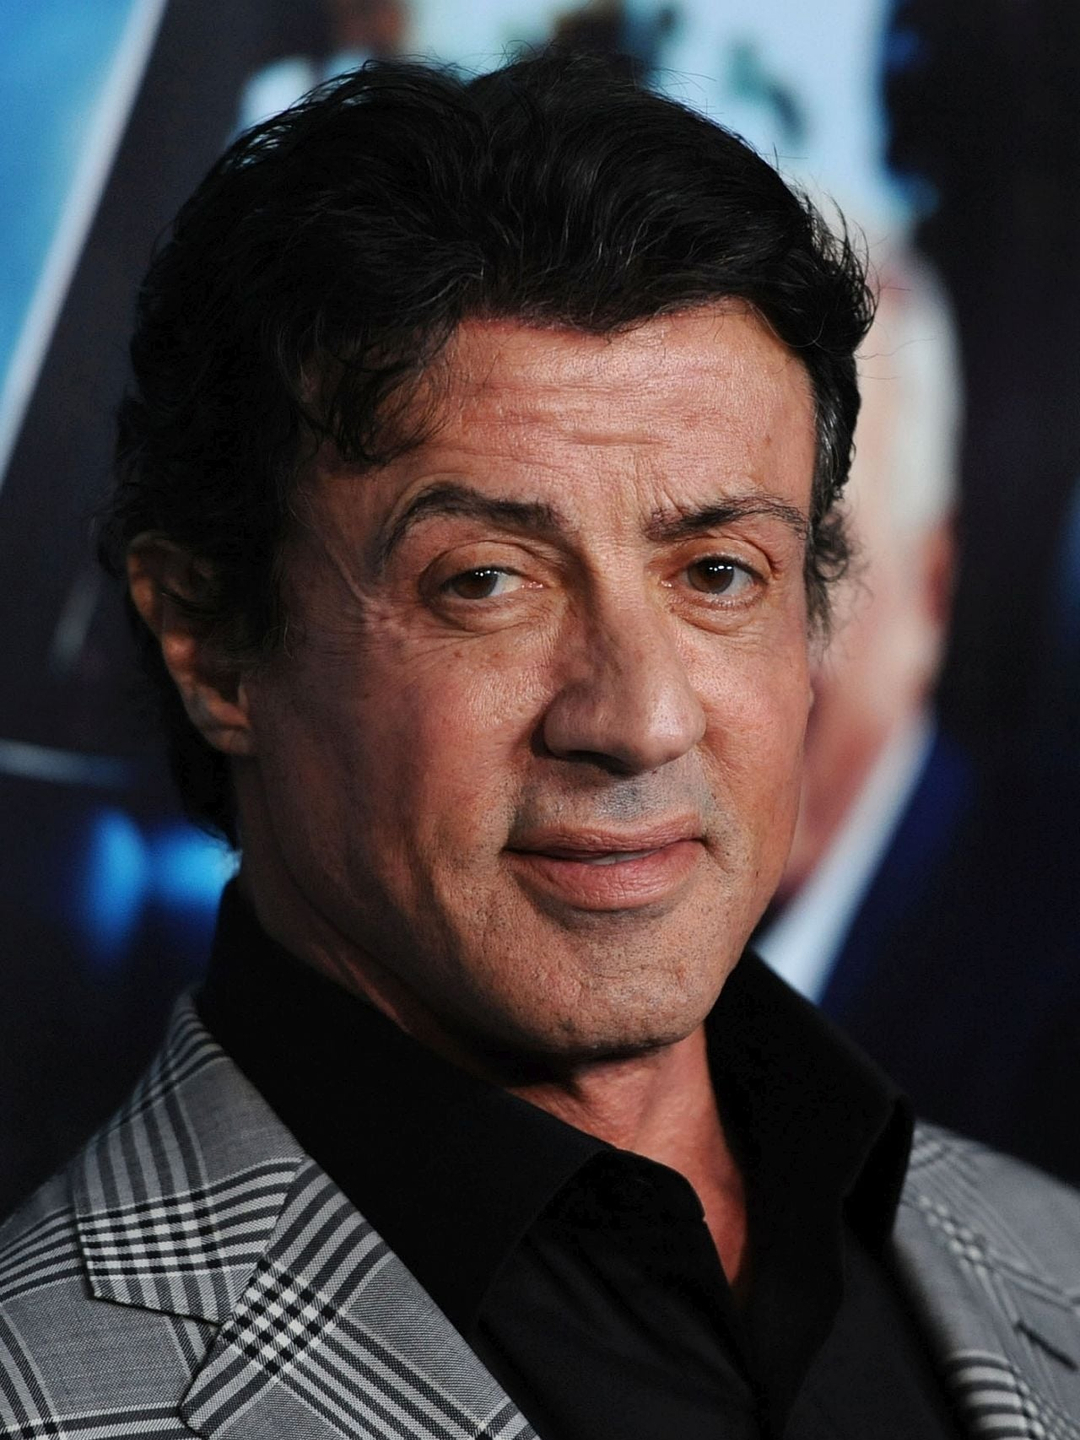 Sylvester Stallone story of success